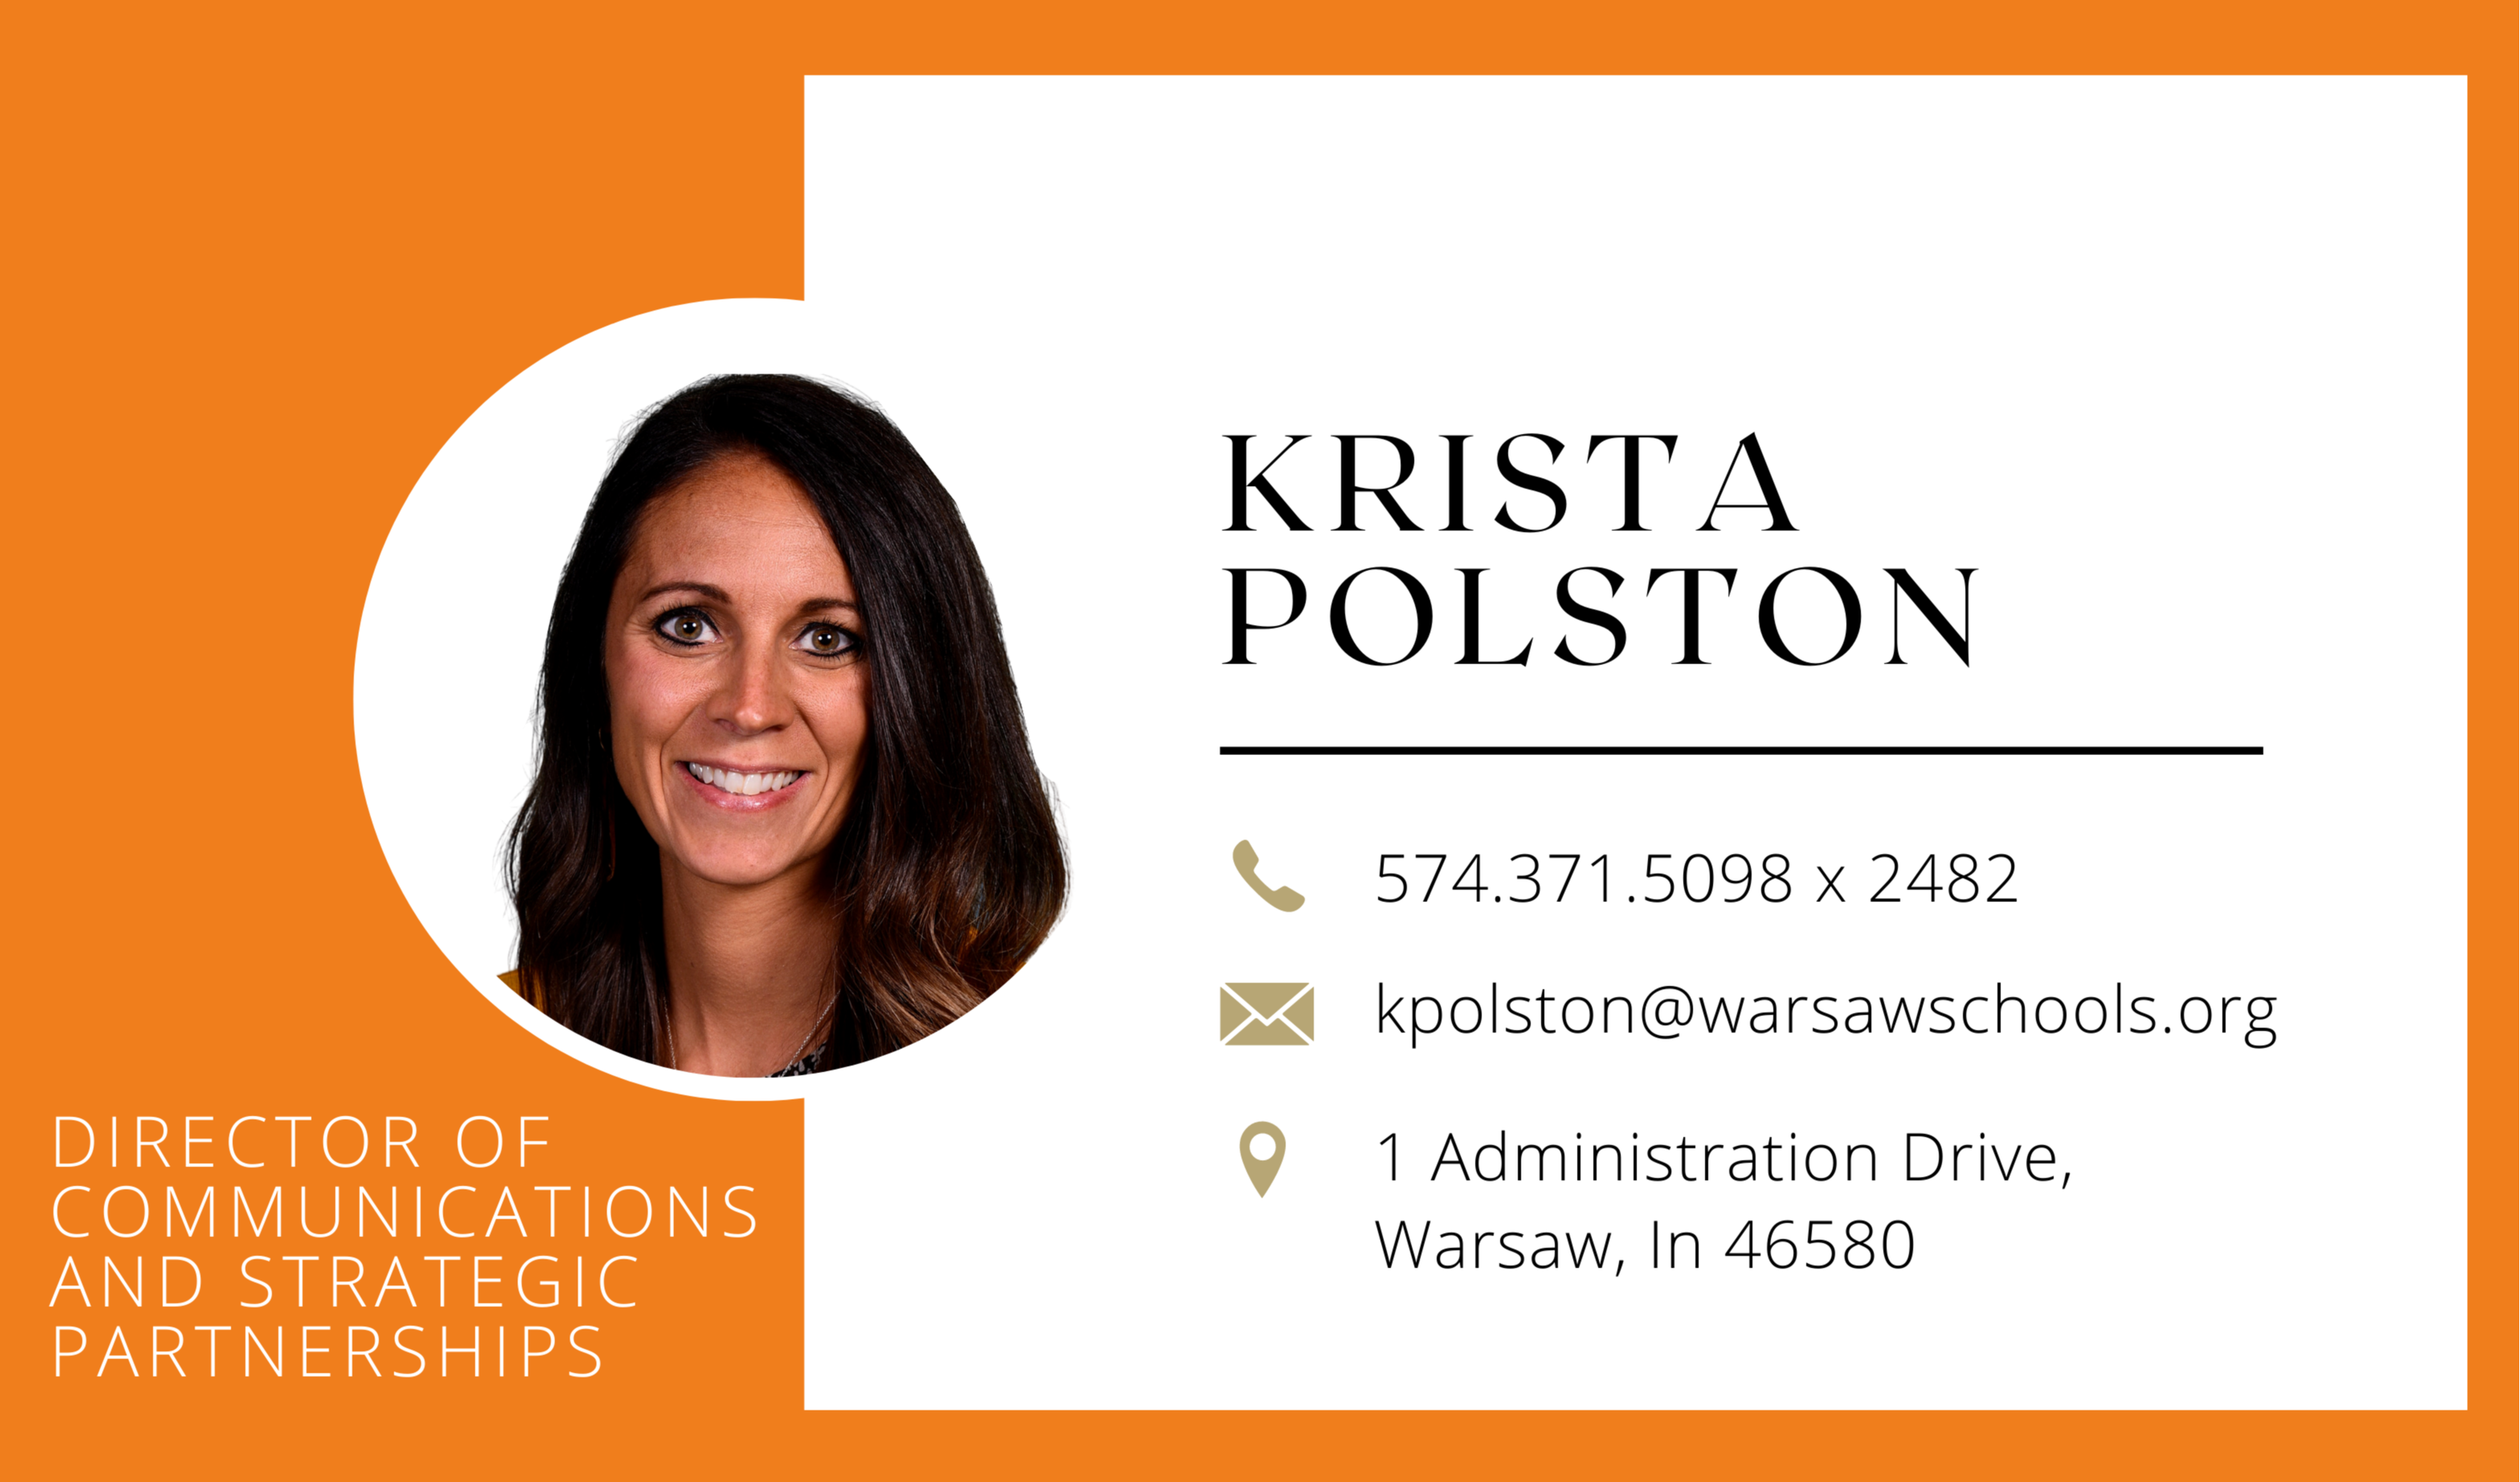 Krista Polston Director of Communications and Strategic Partnerships. Phone number 574 371 5098 ext 2482 email kpolston@warsawschools.org address 1 Administration Drive, Warsaw, In 46580